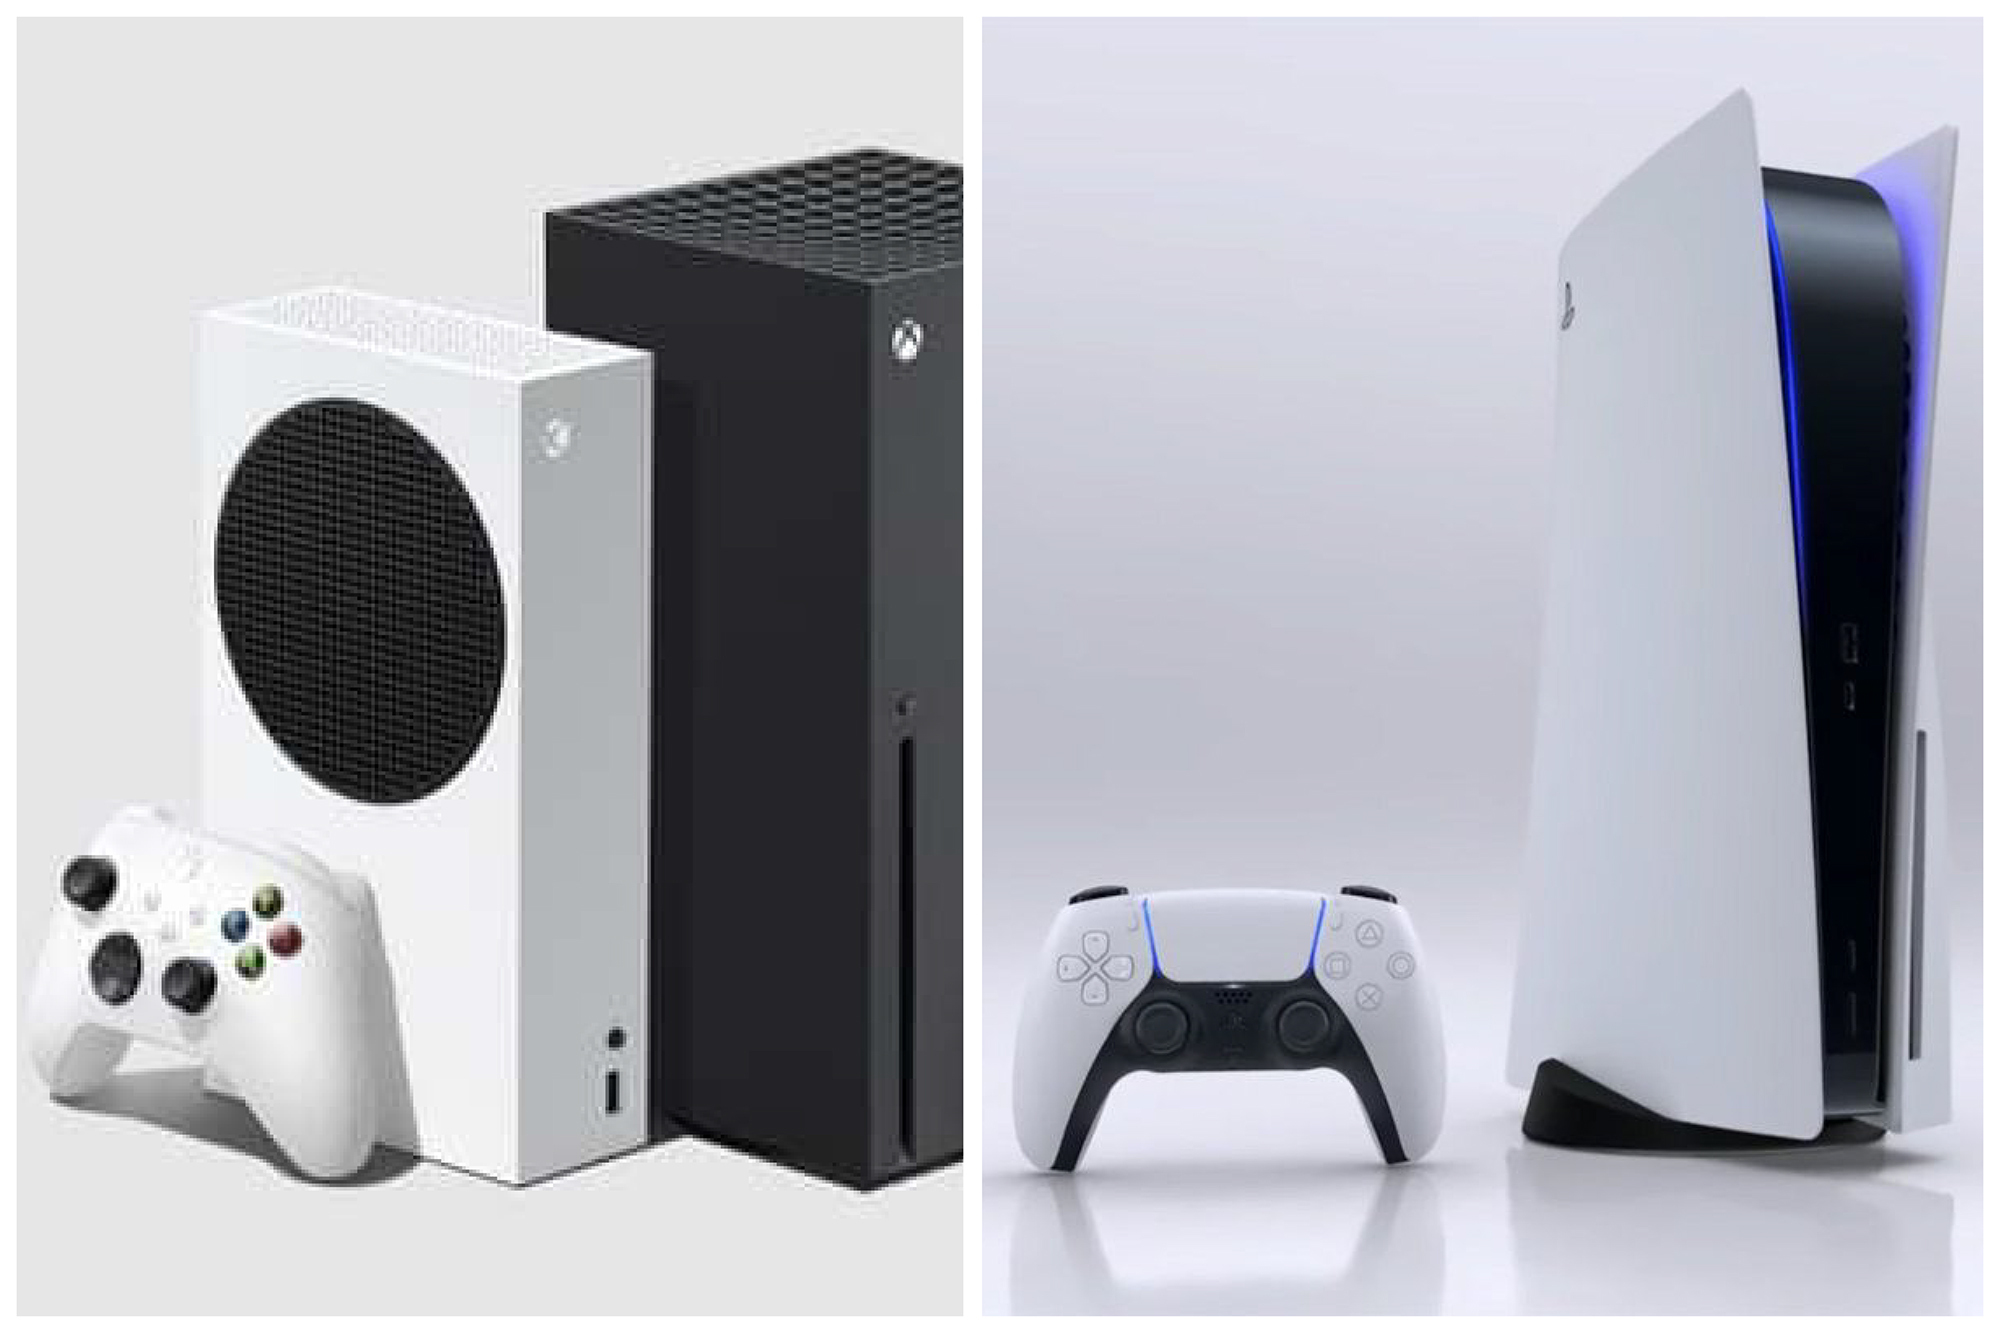 Xbox and PlayStation consoles side by side